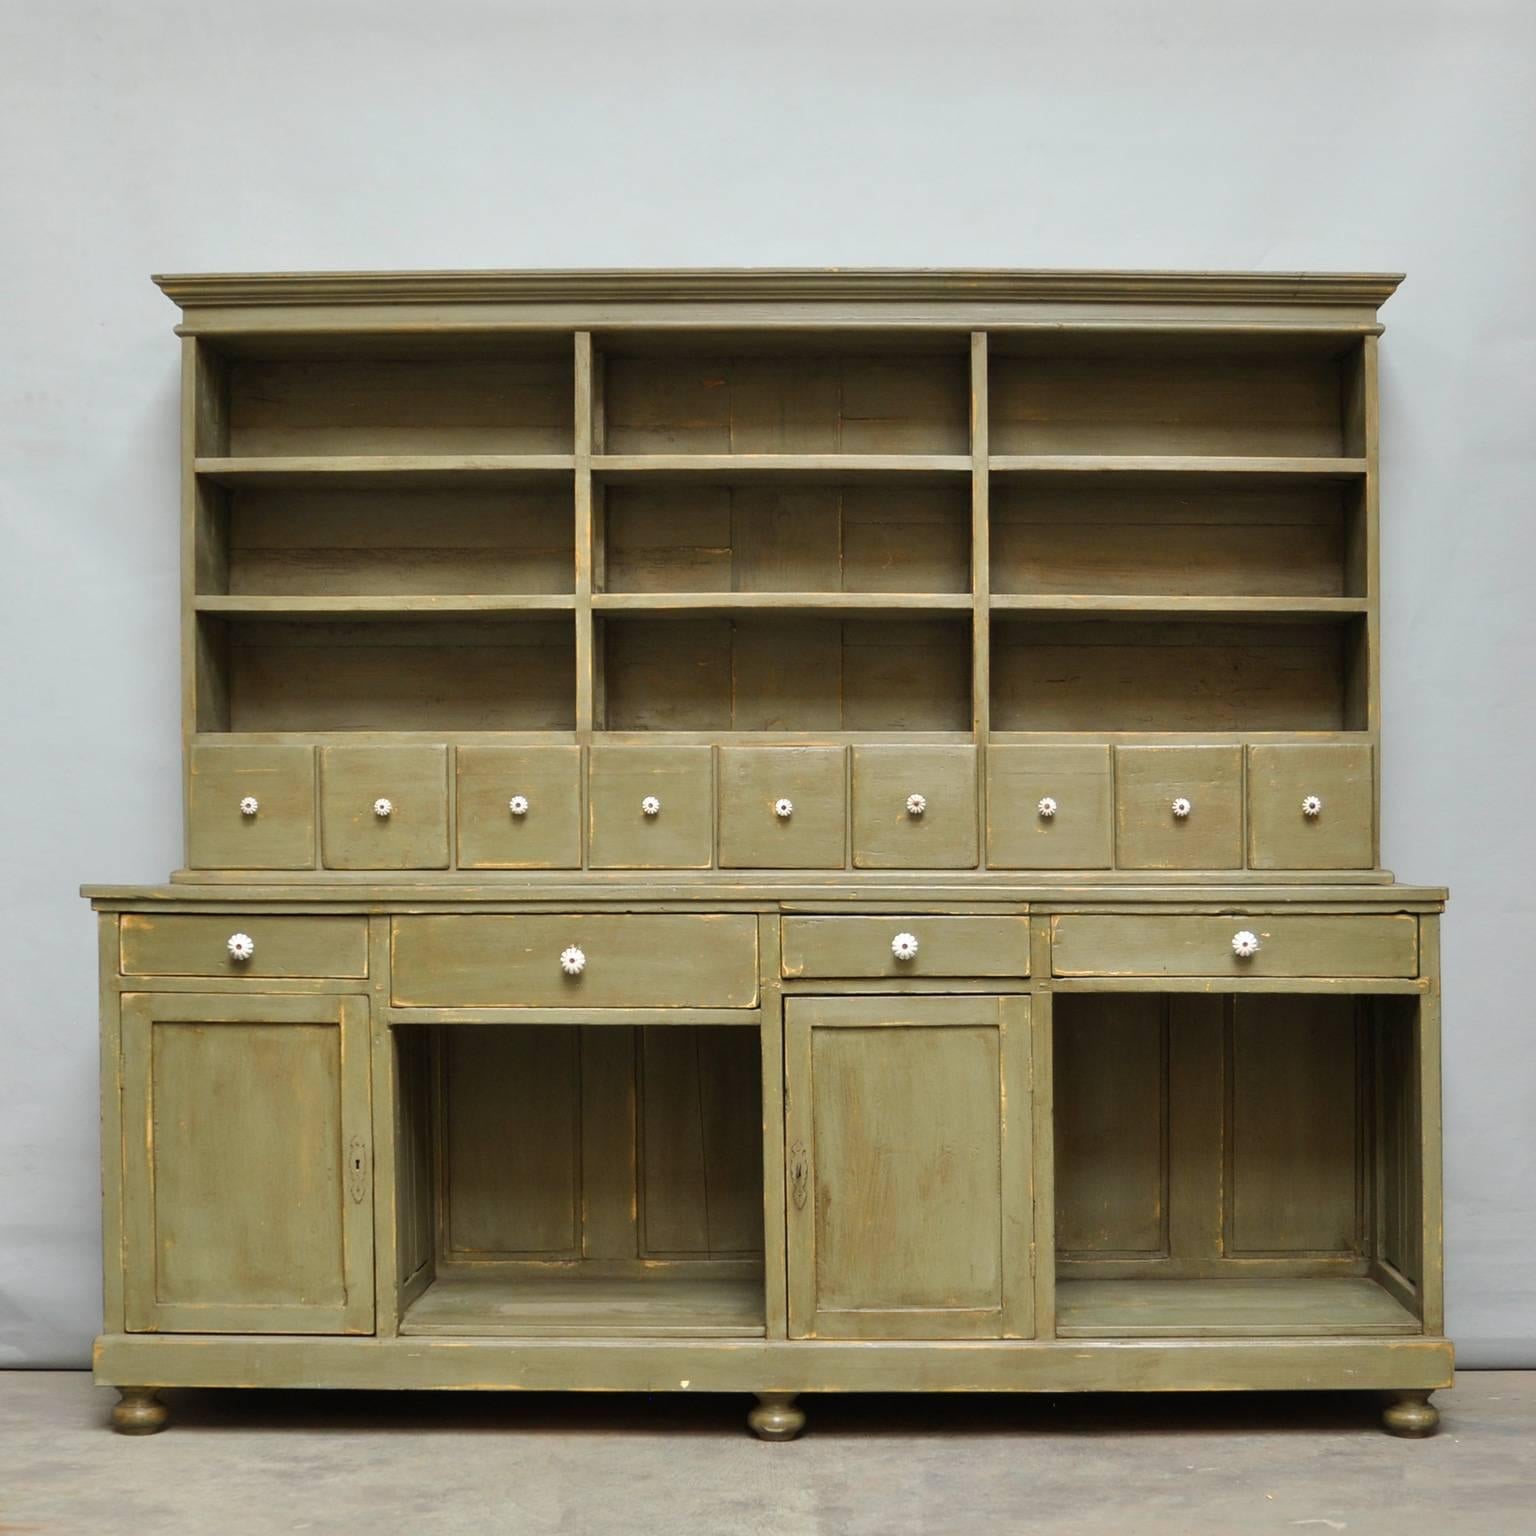 Painted cupboard from the 1930s made of pine with eight drawers on top and two doors and four drawers on the bottom case. The cabinet is build up in two parts (bottem and top).